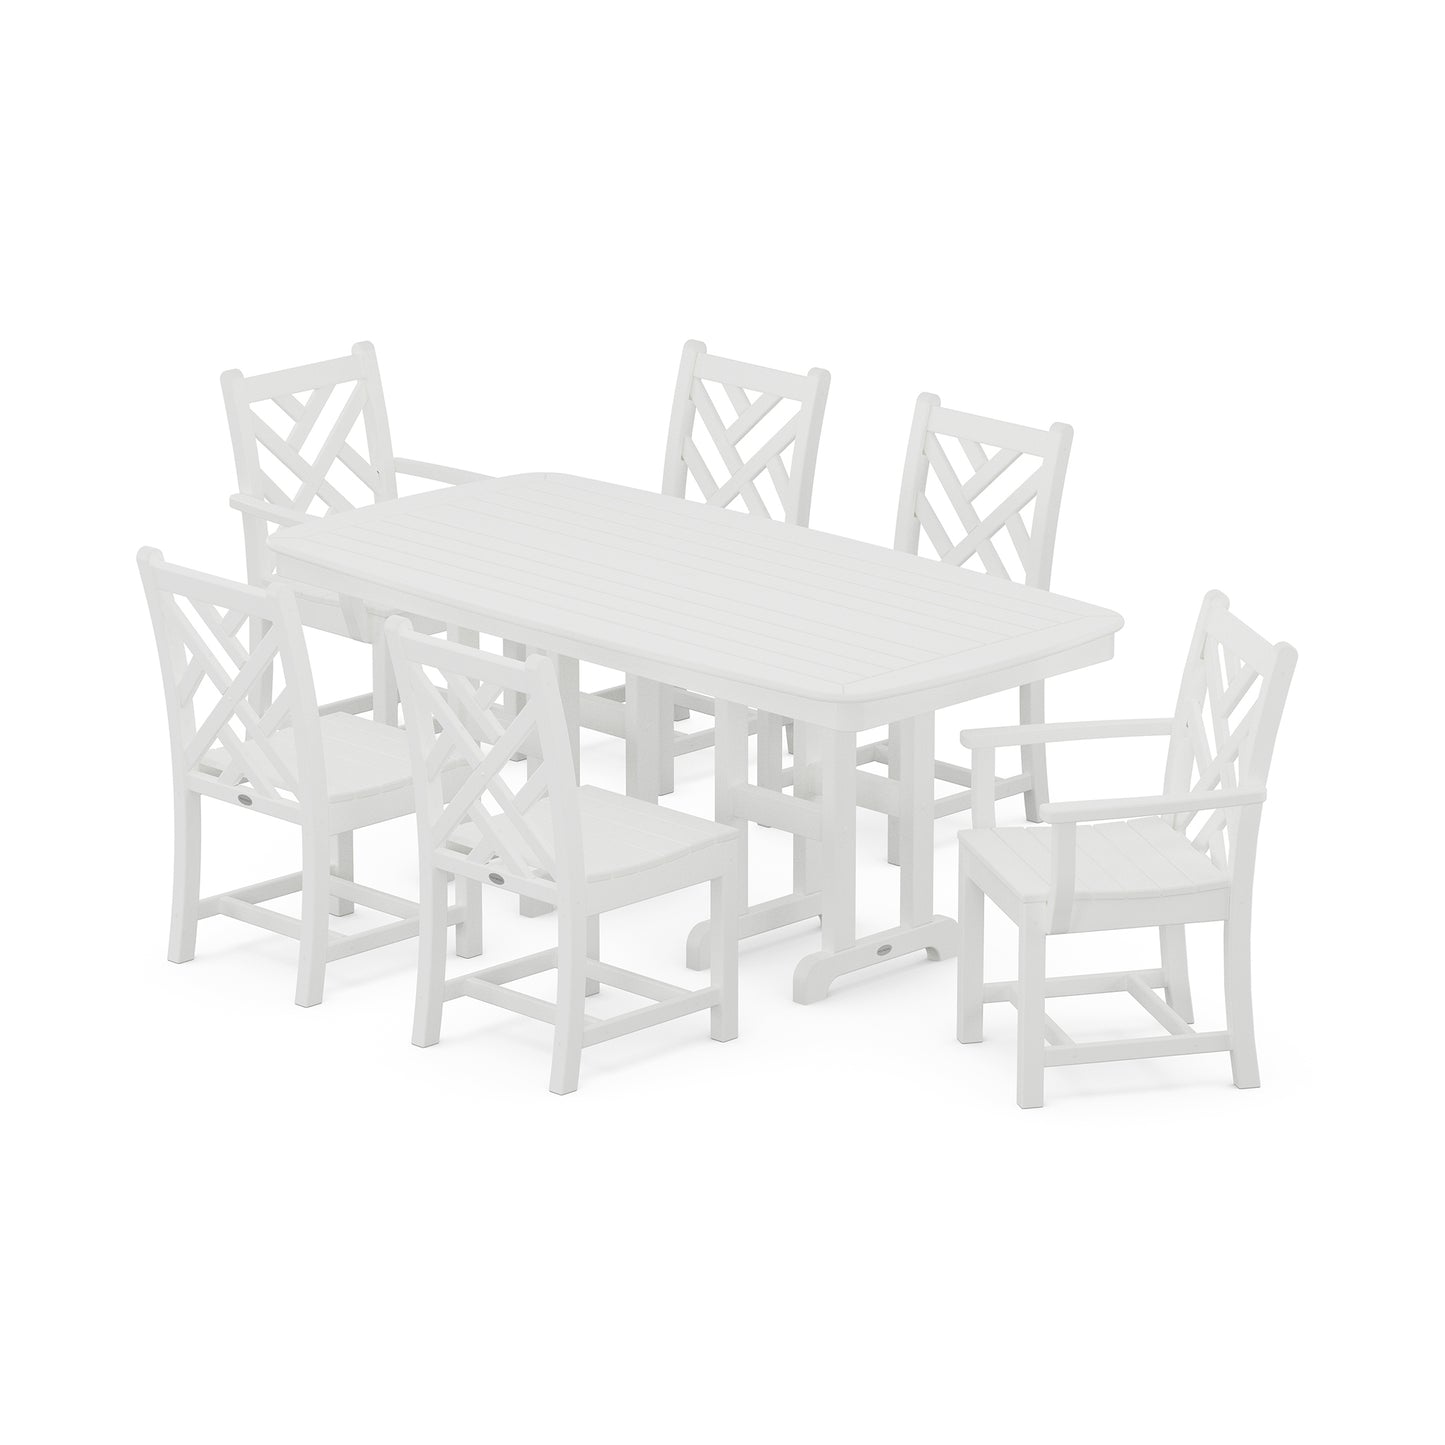 A white POLYWOOD Chippendale 7-Piece Dining Set comprising one rectangle table and six chairs with geometric backrest designs, arranged on a plain white background.